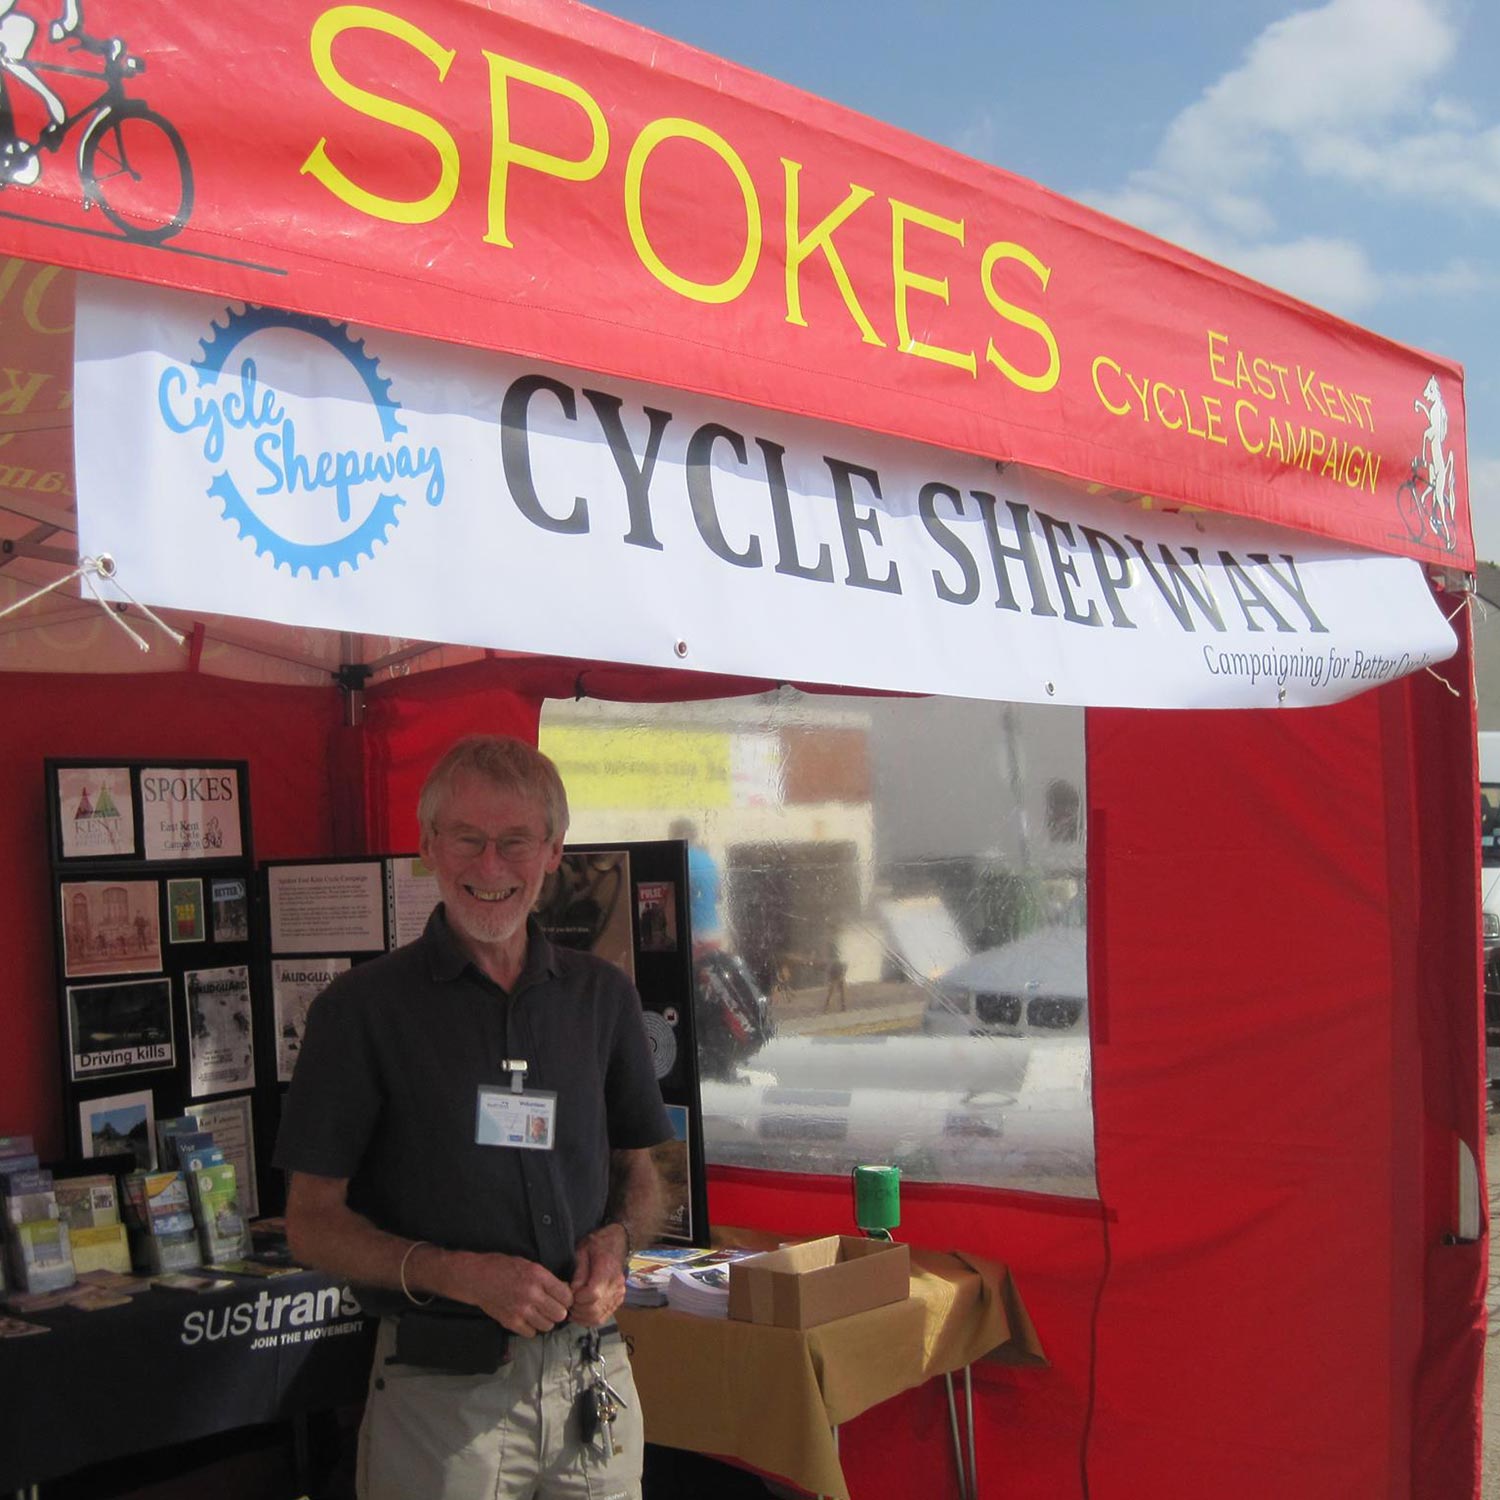 Paul Rees - CYSY Committee Member and Supporter of Spokes, the East Kent Cycling Campaign Group